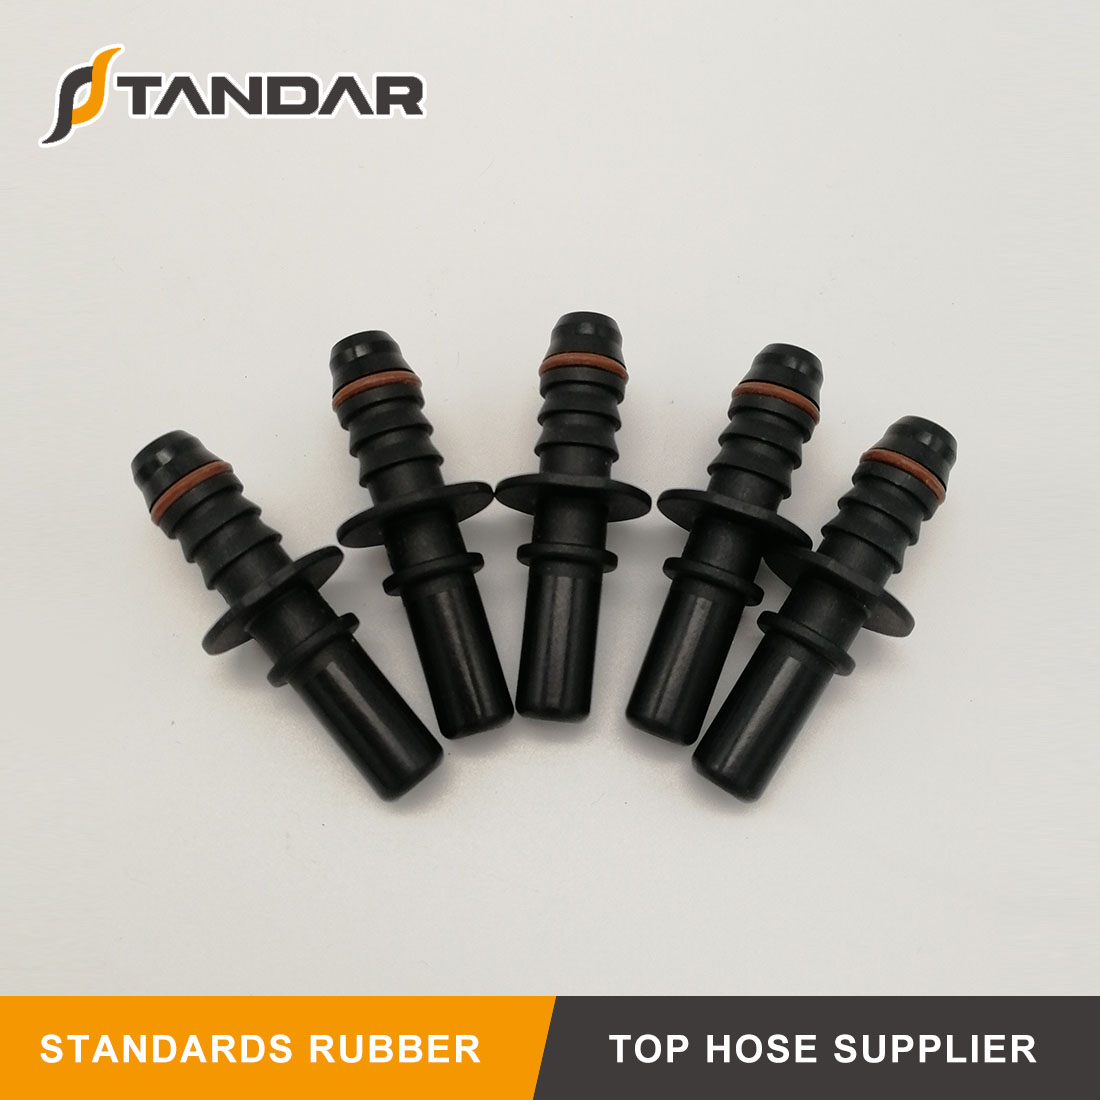 Nylon Straight Fuel Line Male Quick Connector ID 15.82 mm For Auto Motorcylcle Plastic Fuel Hose